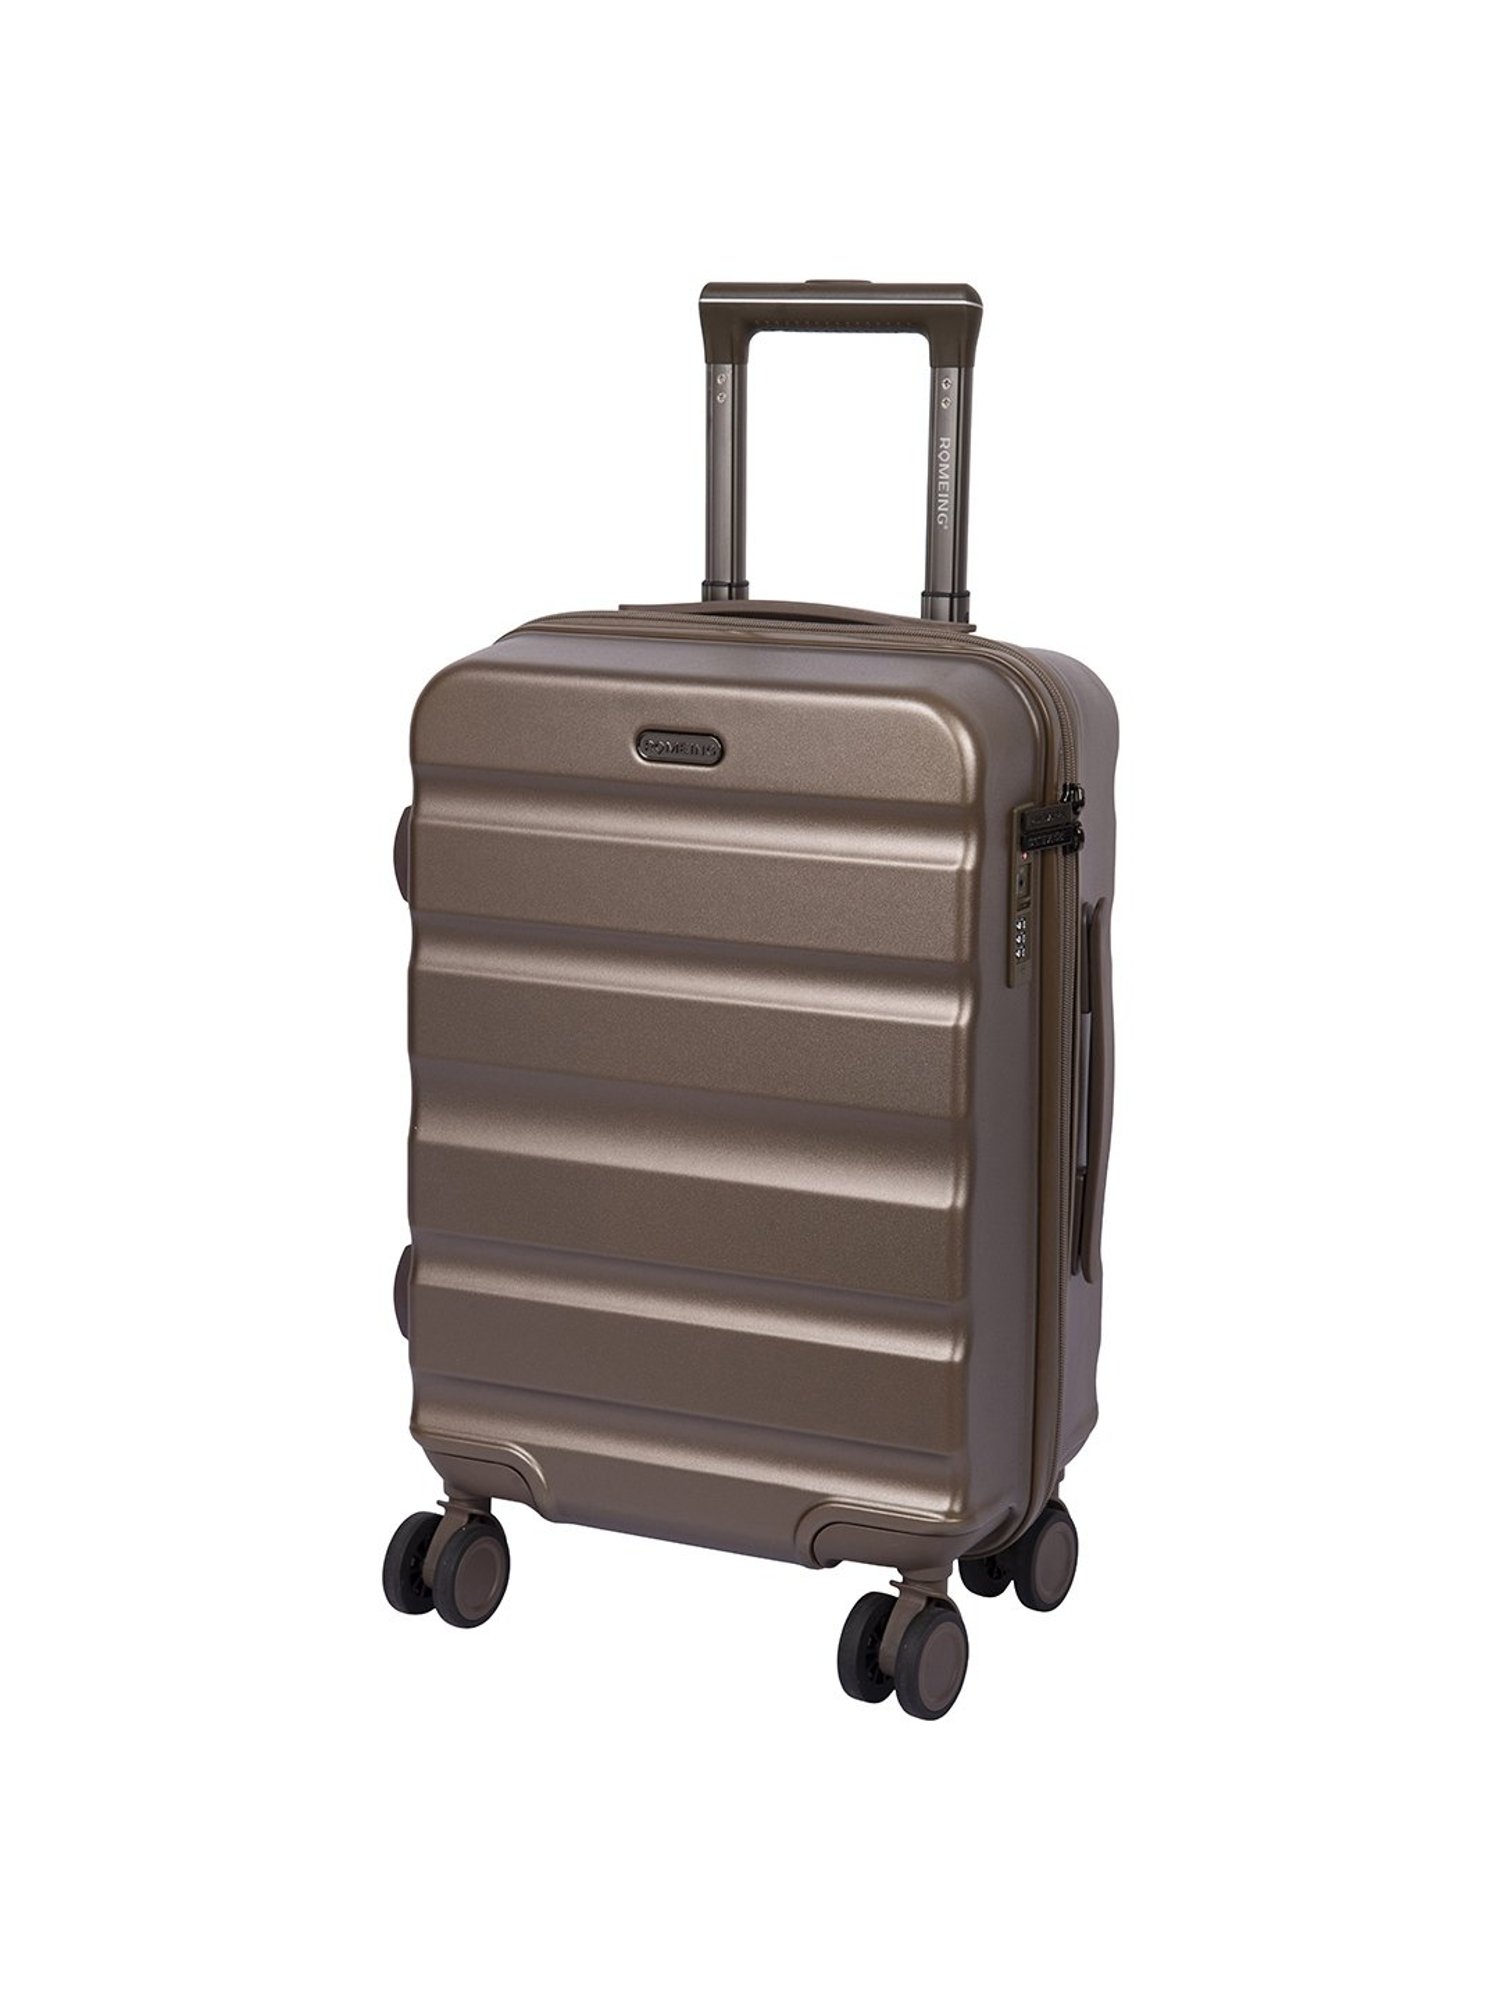 ROMEING Tuscany 24 inch, Polypropylene Luggage, Sky Blue 65 cm Trolley Bag  Check-in Suitcase 8 Wheels - 24 inch Sky Blue - Price in India |  Flipkart.com